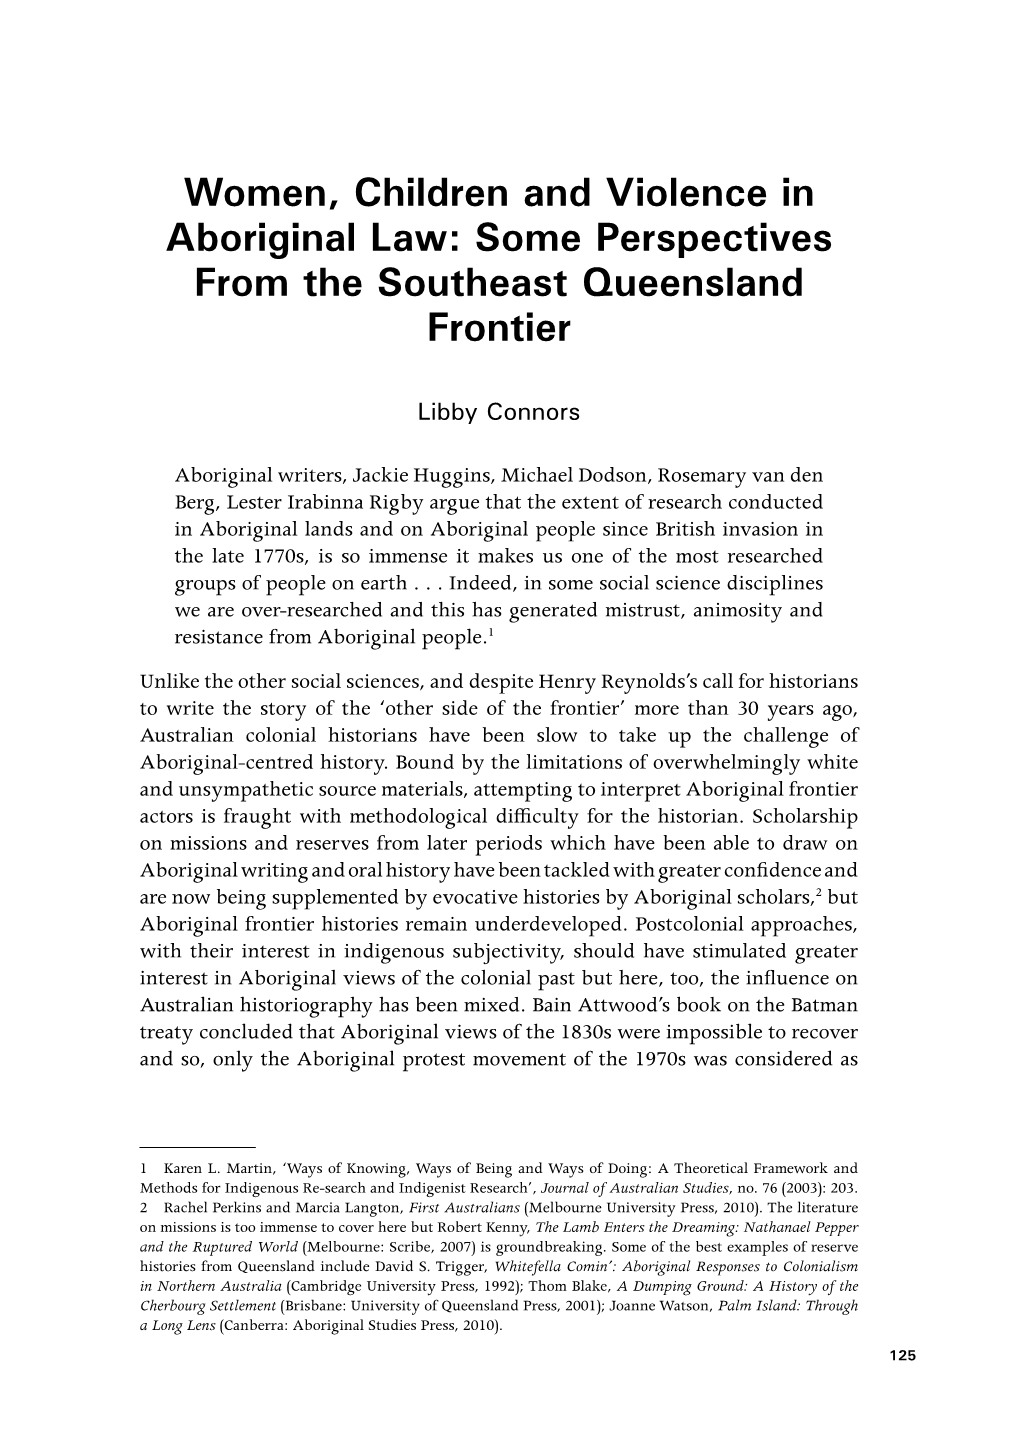 Women, Children and Violence in Aboriginal Law: Some Perspectives from the Southeast Queensland Frontier﻿﻿This Paper Draws I